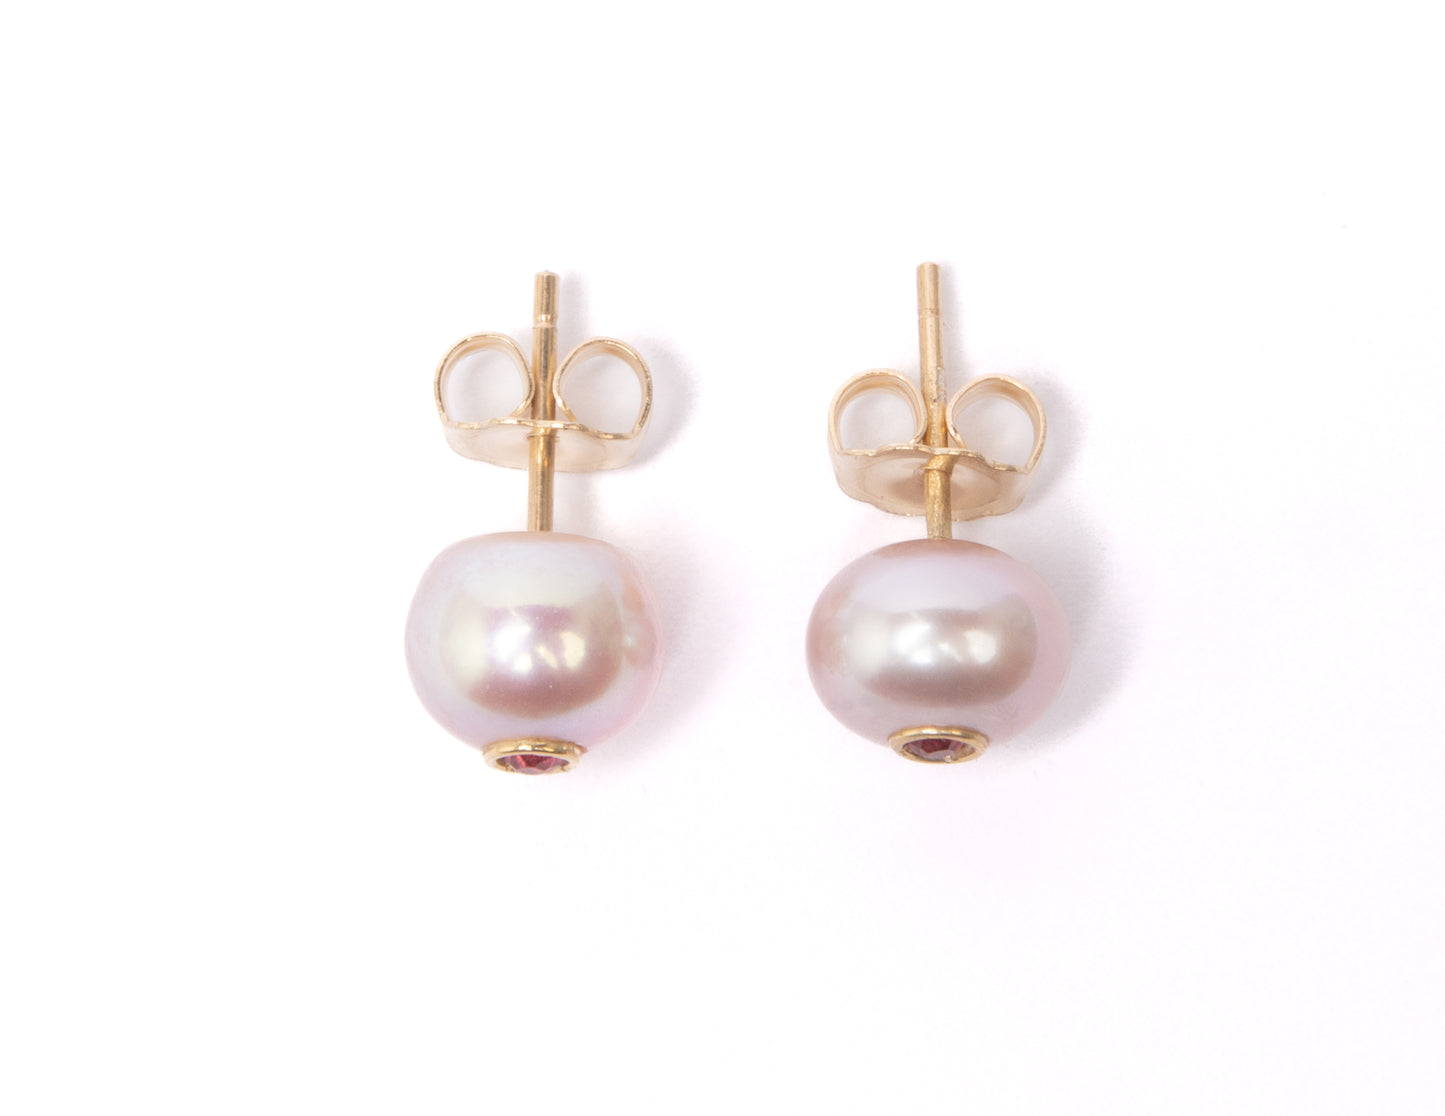 14K Gold Pink Freshwater Pearl + Red Spinel Stud Earrings